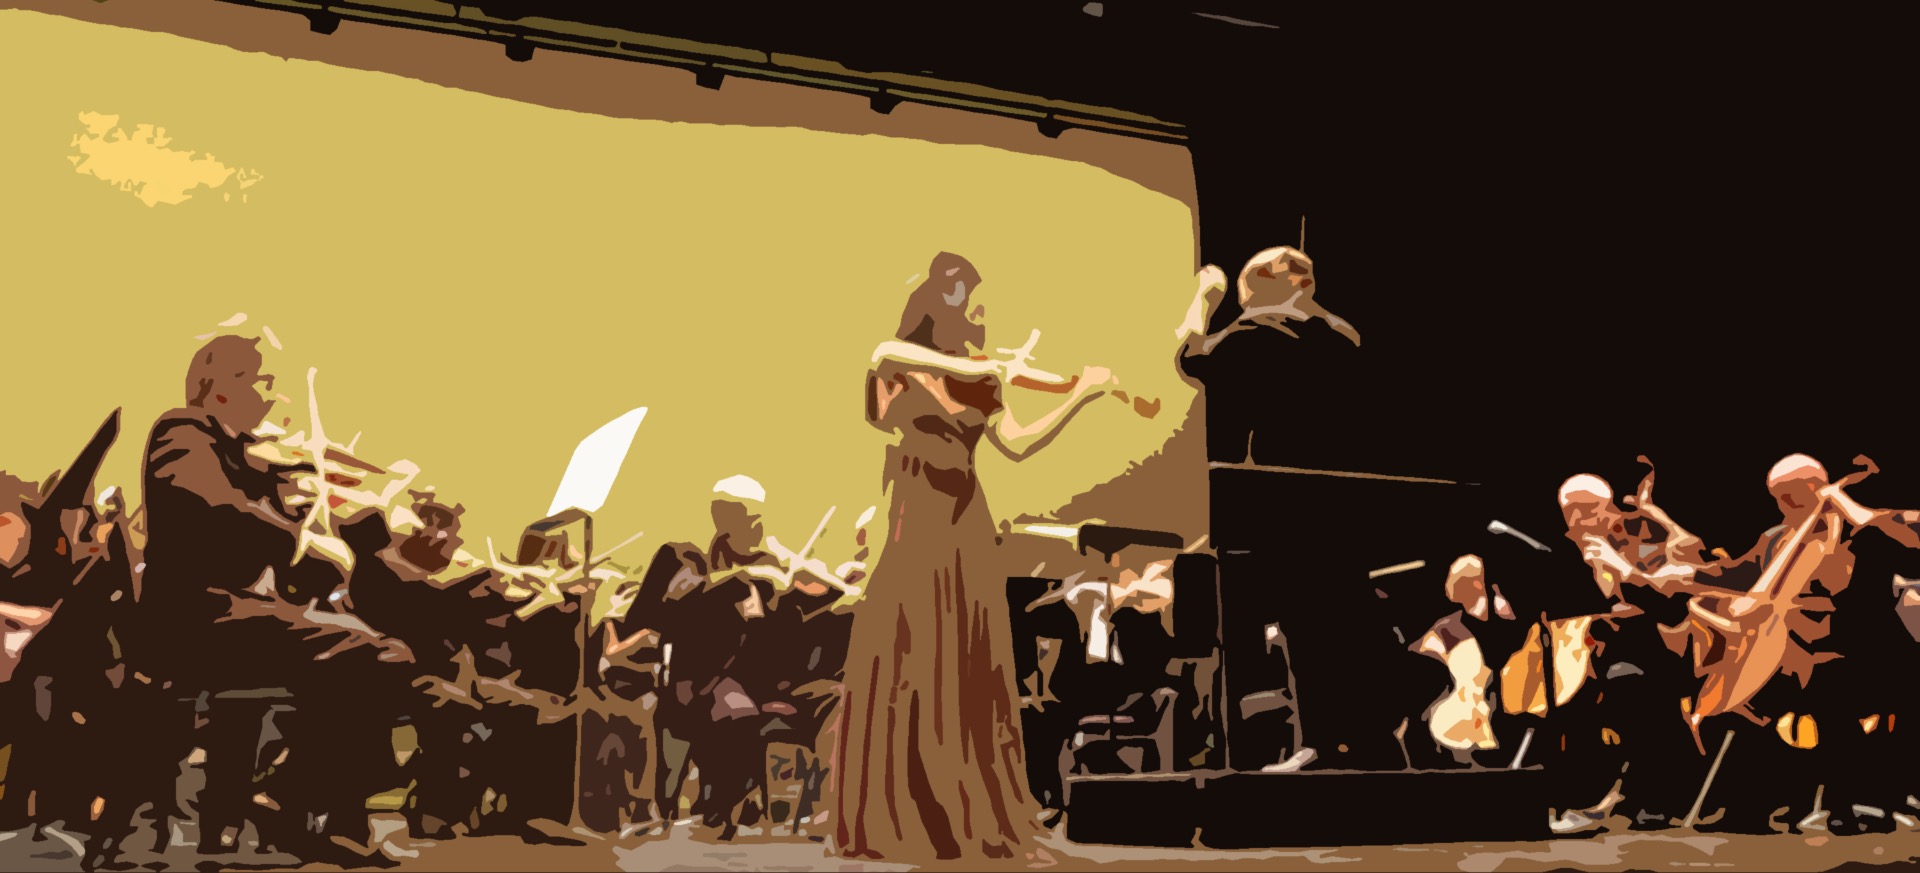 Susanne Hou plays violin against a pear coloured stage background and with an orchestra